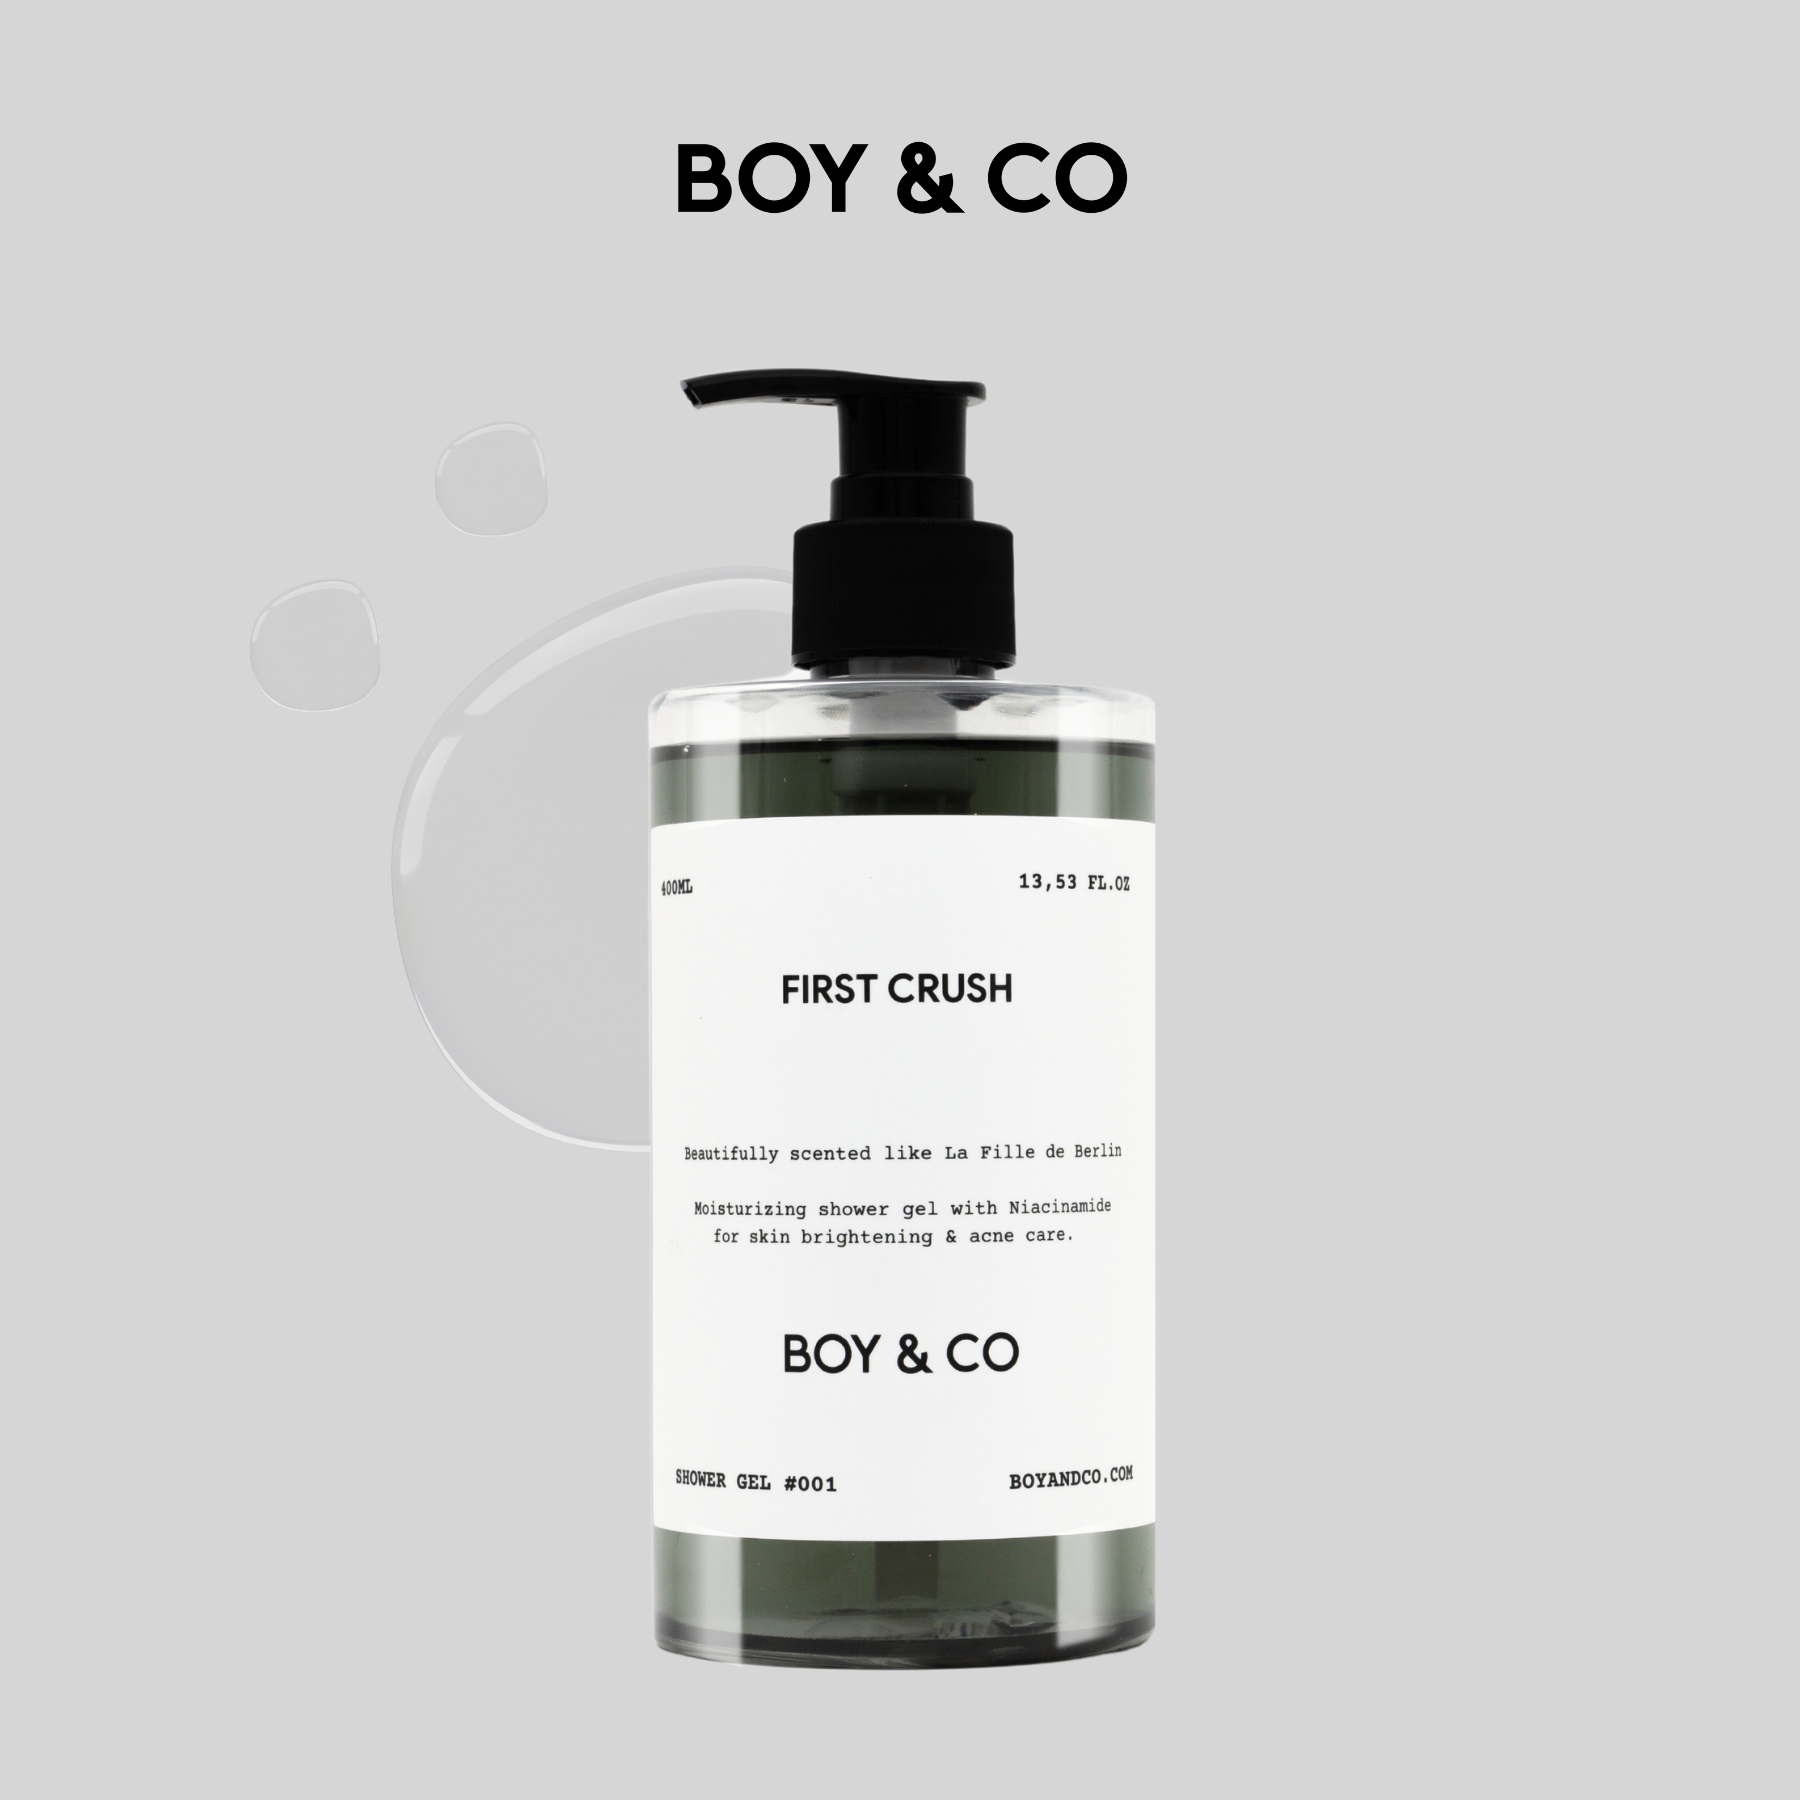 BOY & CO Aromatic Shower Gel First Crush / Young Rose / Daydreamer / Pearadise 400ml